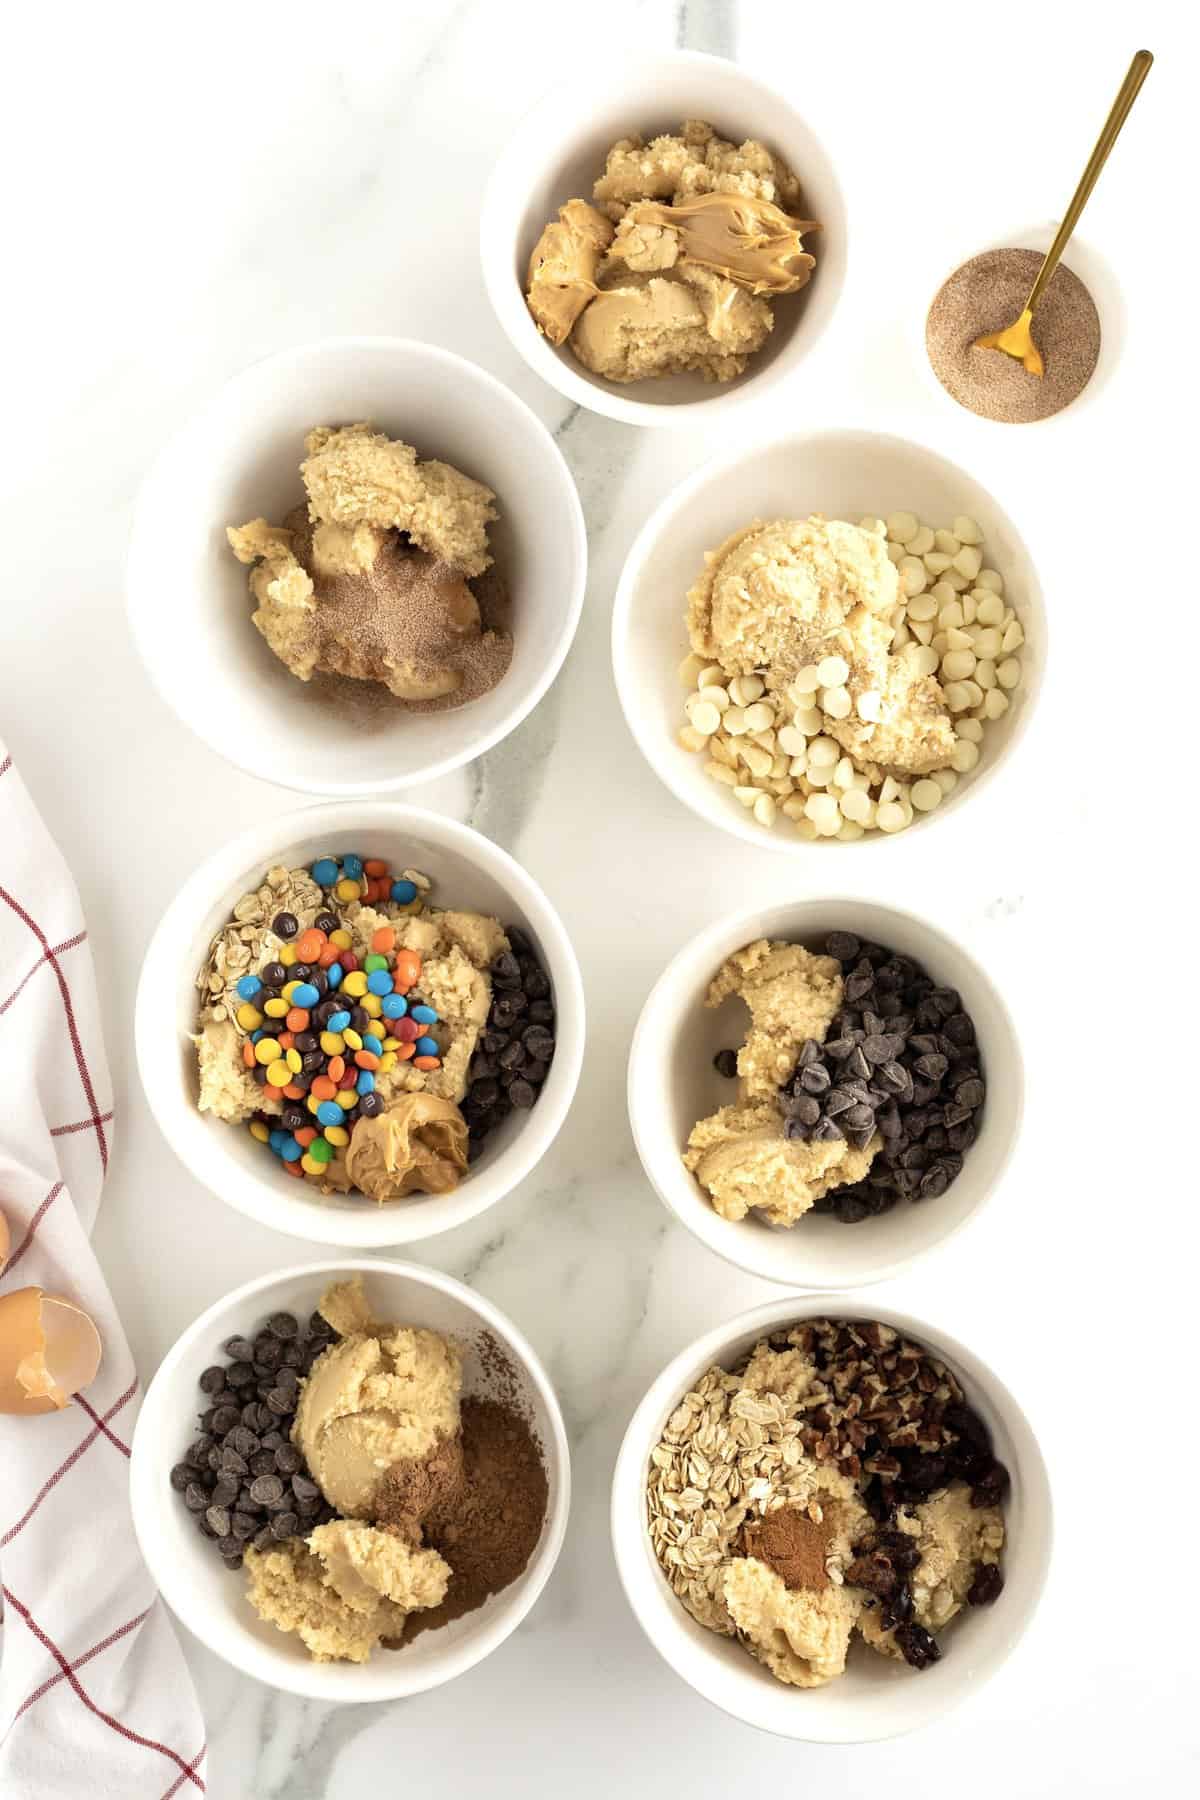 One Cookie Dough 7 Possible Flavors by The BakerMama